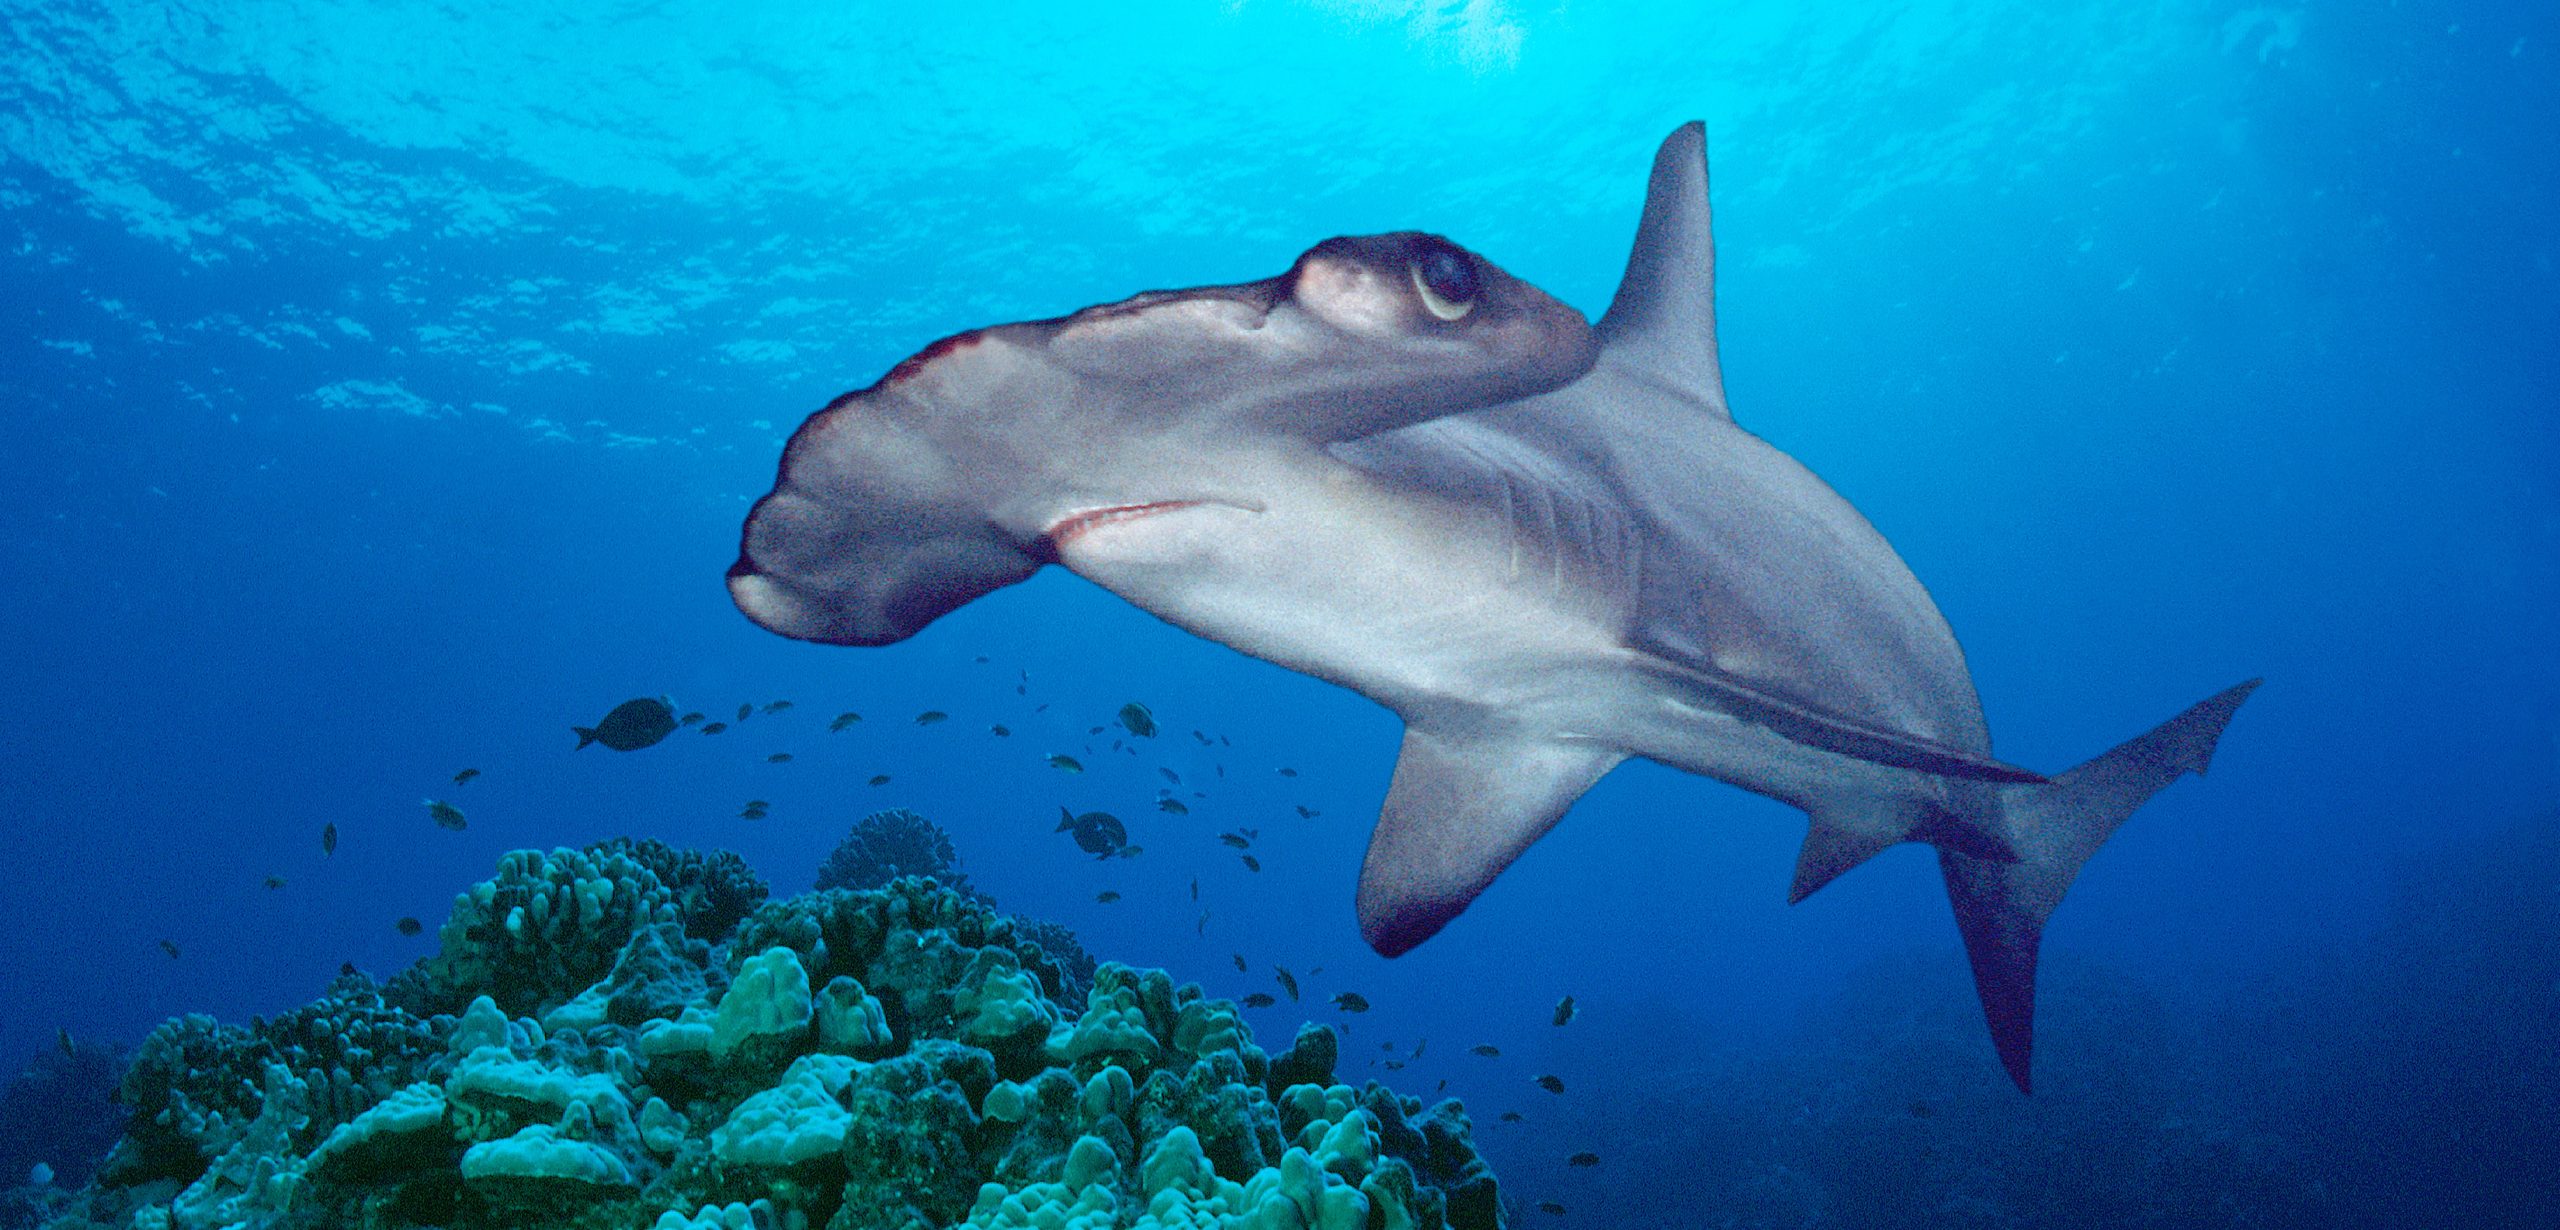 Scalloped hammerhead sharks are highly migratory, so identifying nursery sites is particularly important to efforts to protect this endangered species. Photo by Stephen Frink Collection/Alamy Stock Photo